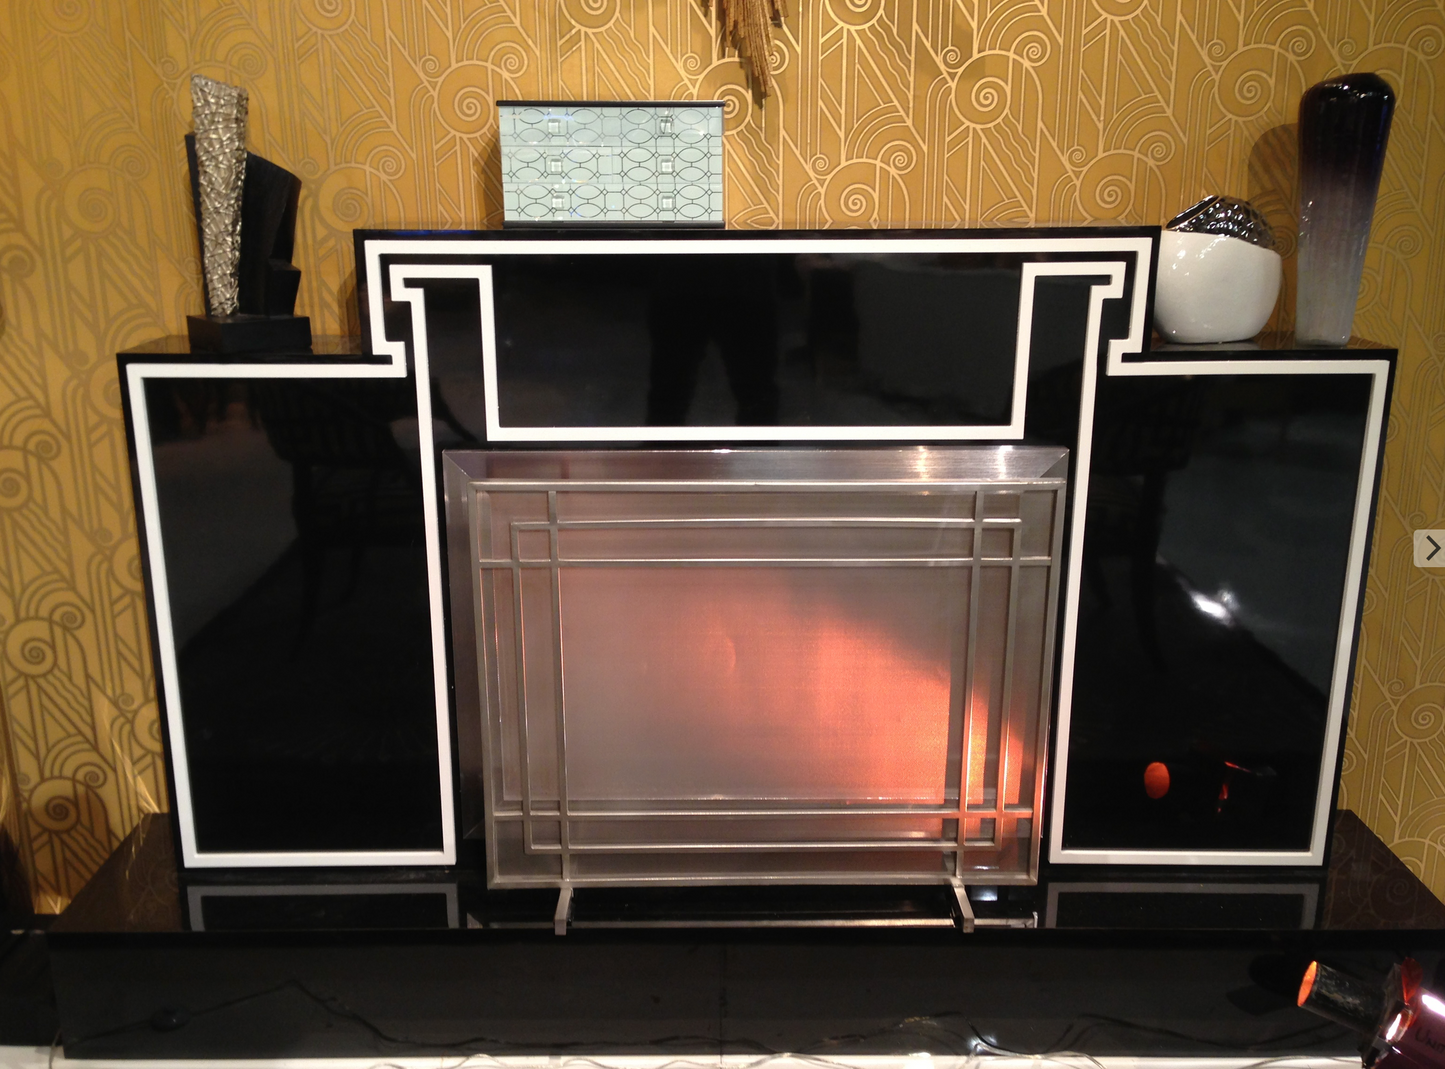 ART DECO GLOSSY BLACK AND WHITE FIREPLACE MANTLE